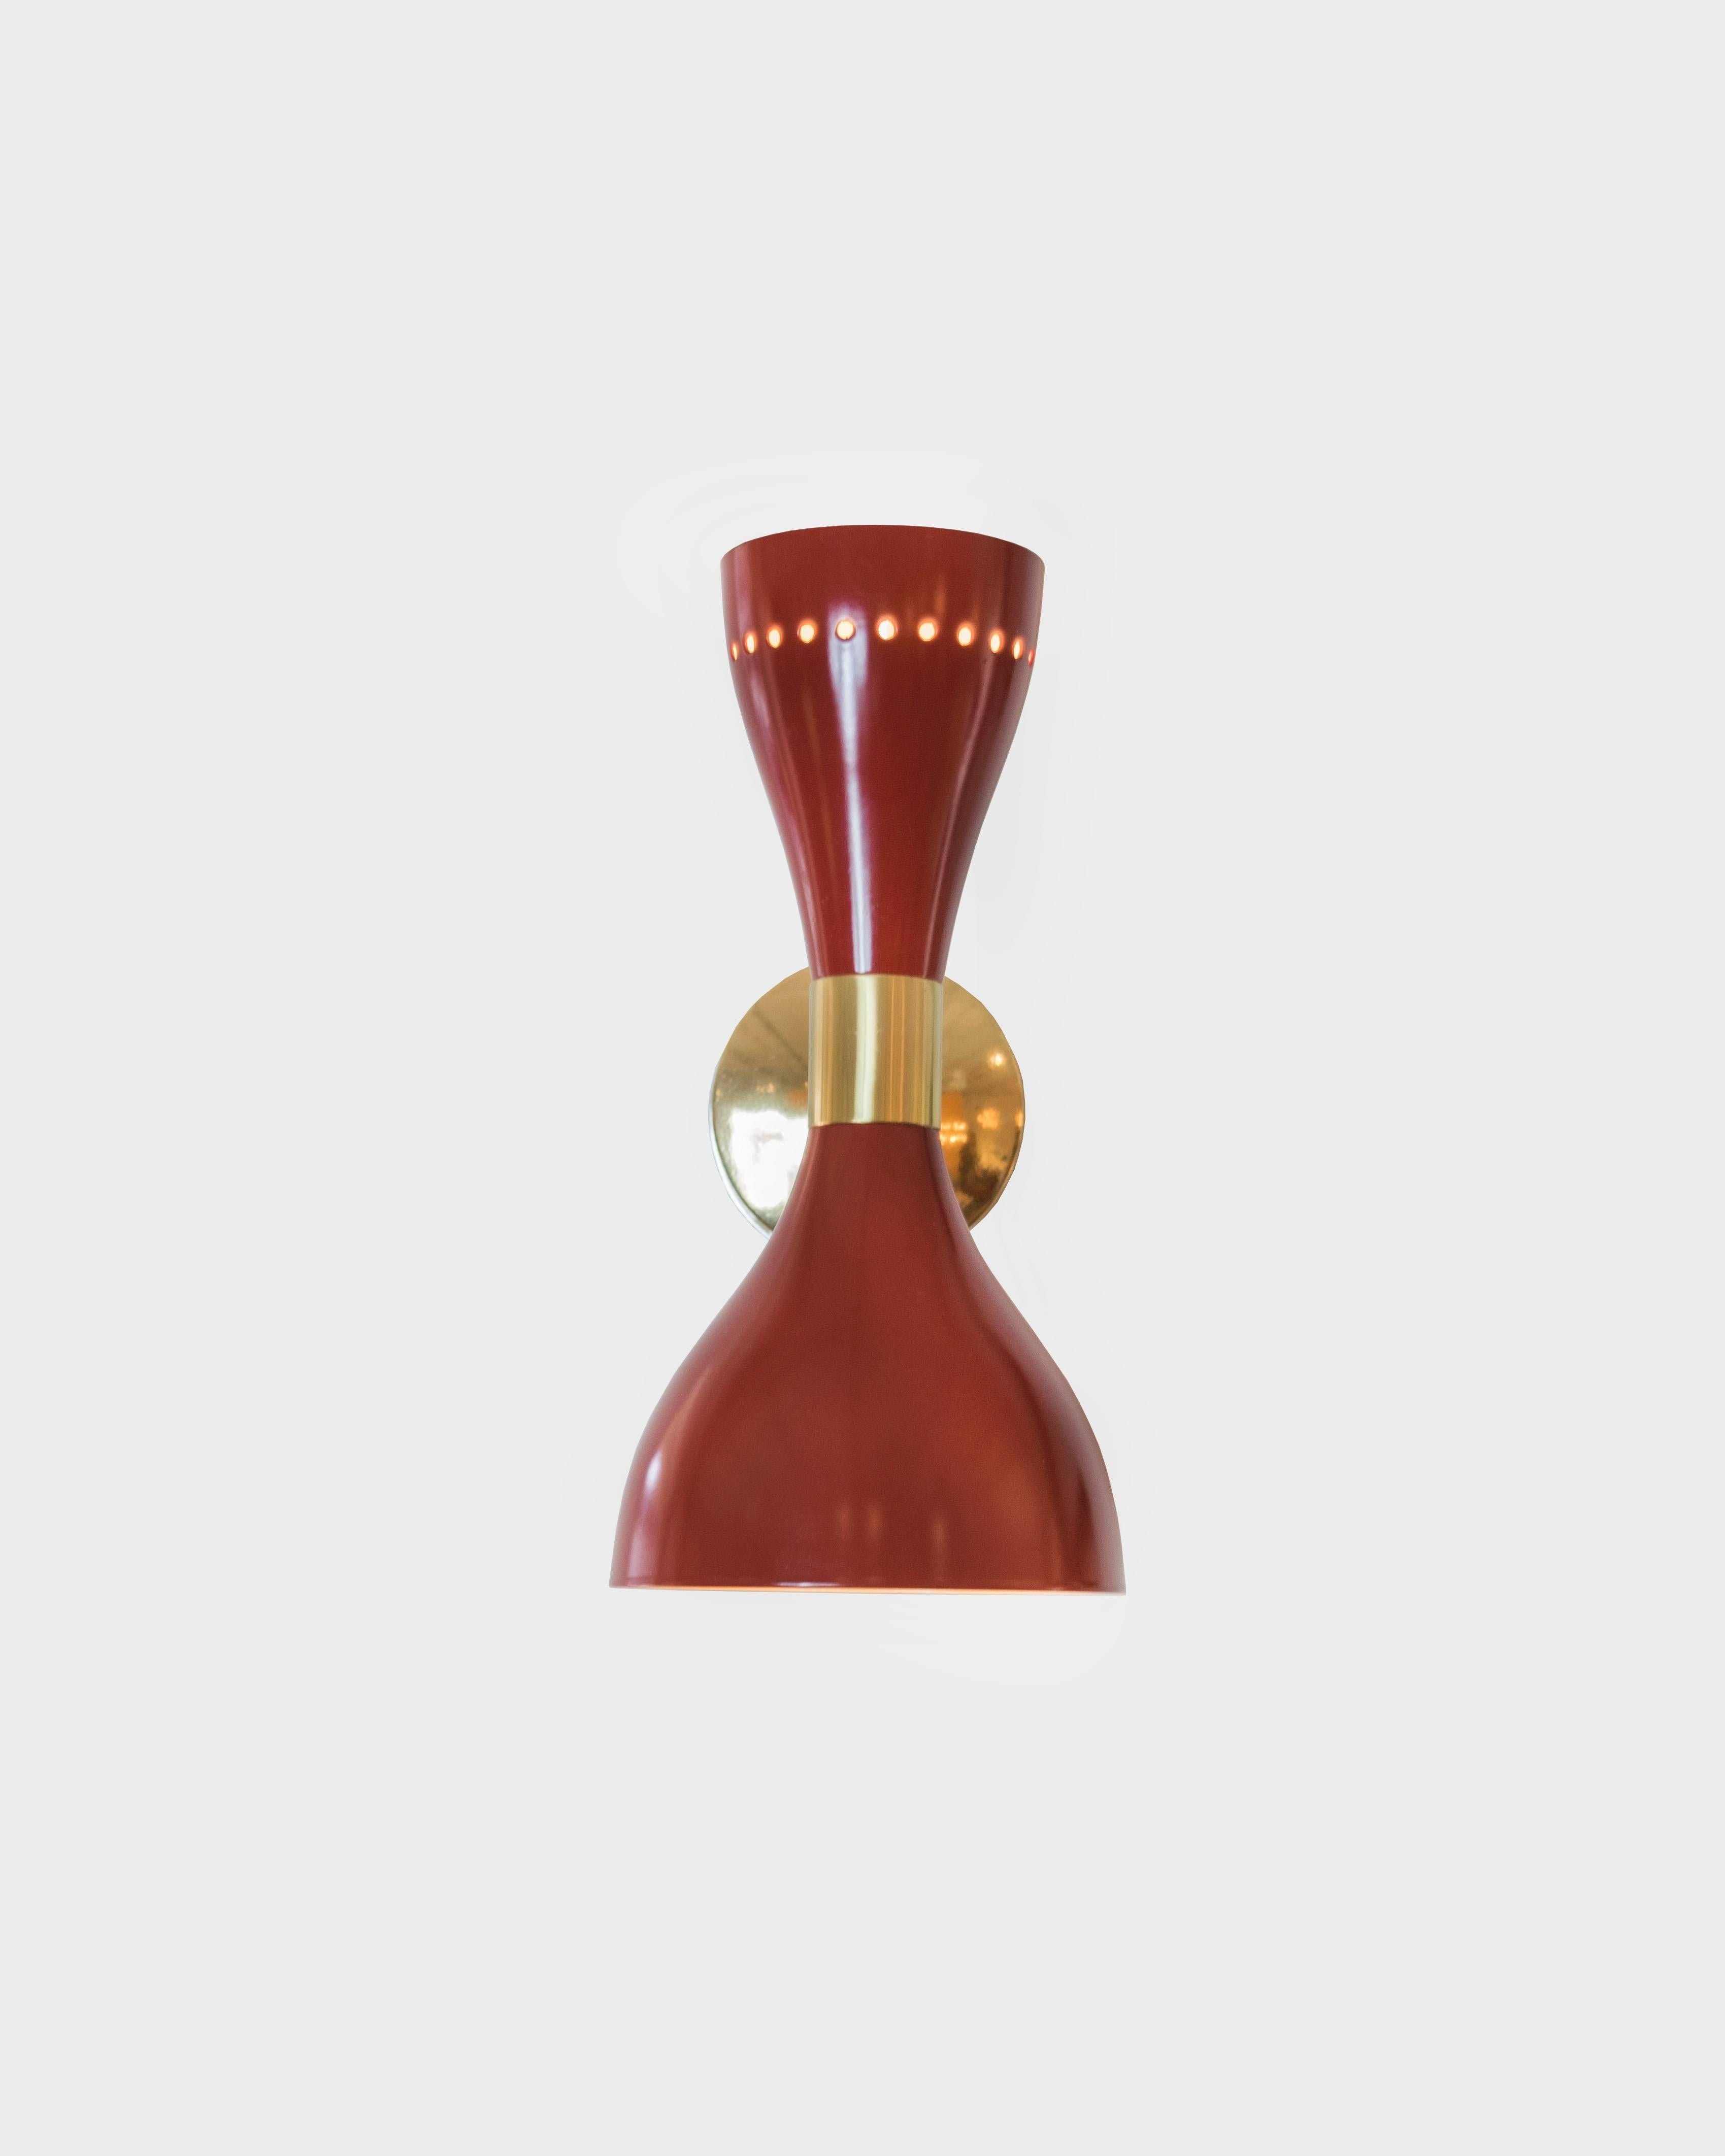 A pair of Stilnovo red lacquer and brass sconces with both up and down lighting in a conical shape. The outer rim extends 11.5 inches from the wall and the upper cone has a ring of perforated circles to add more drama to the pair.